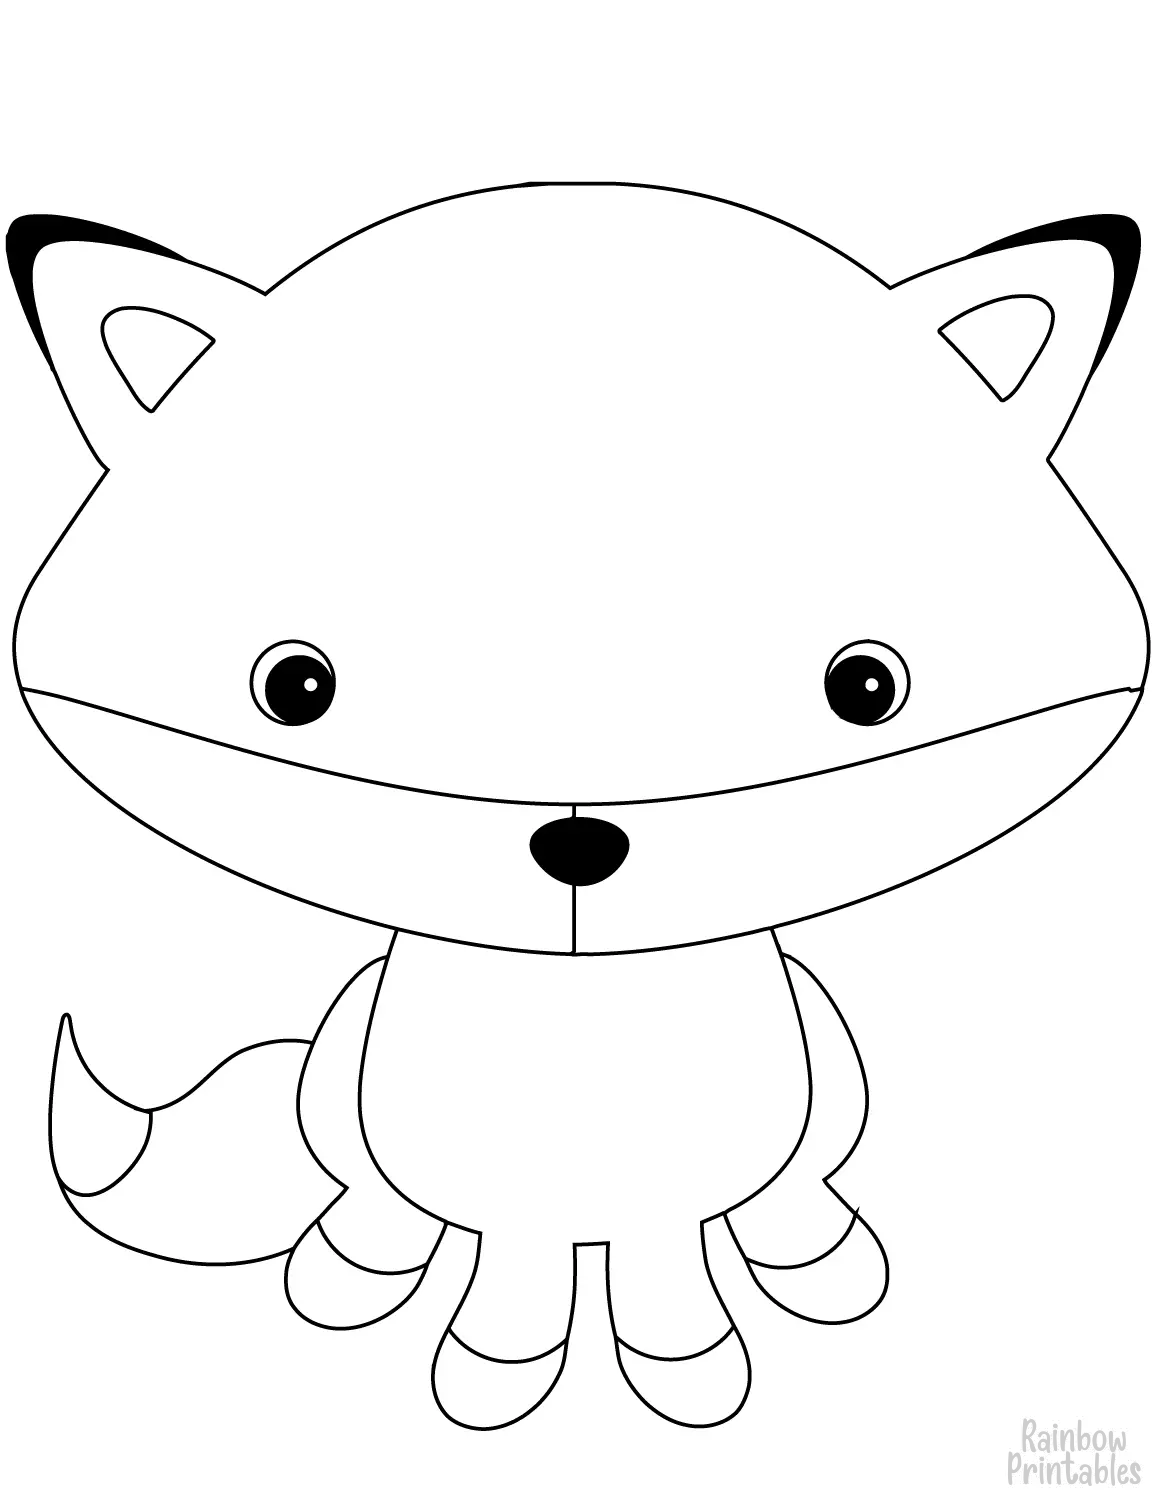 adorable-fox-2-coloring-page-for kids-animal-doodle